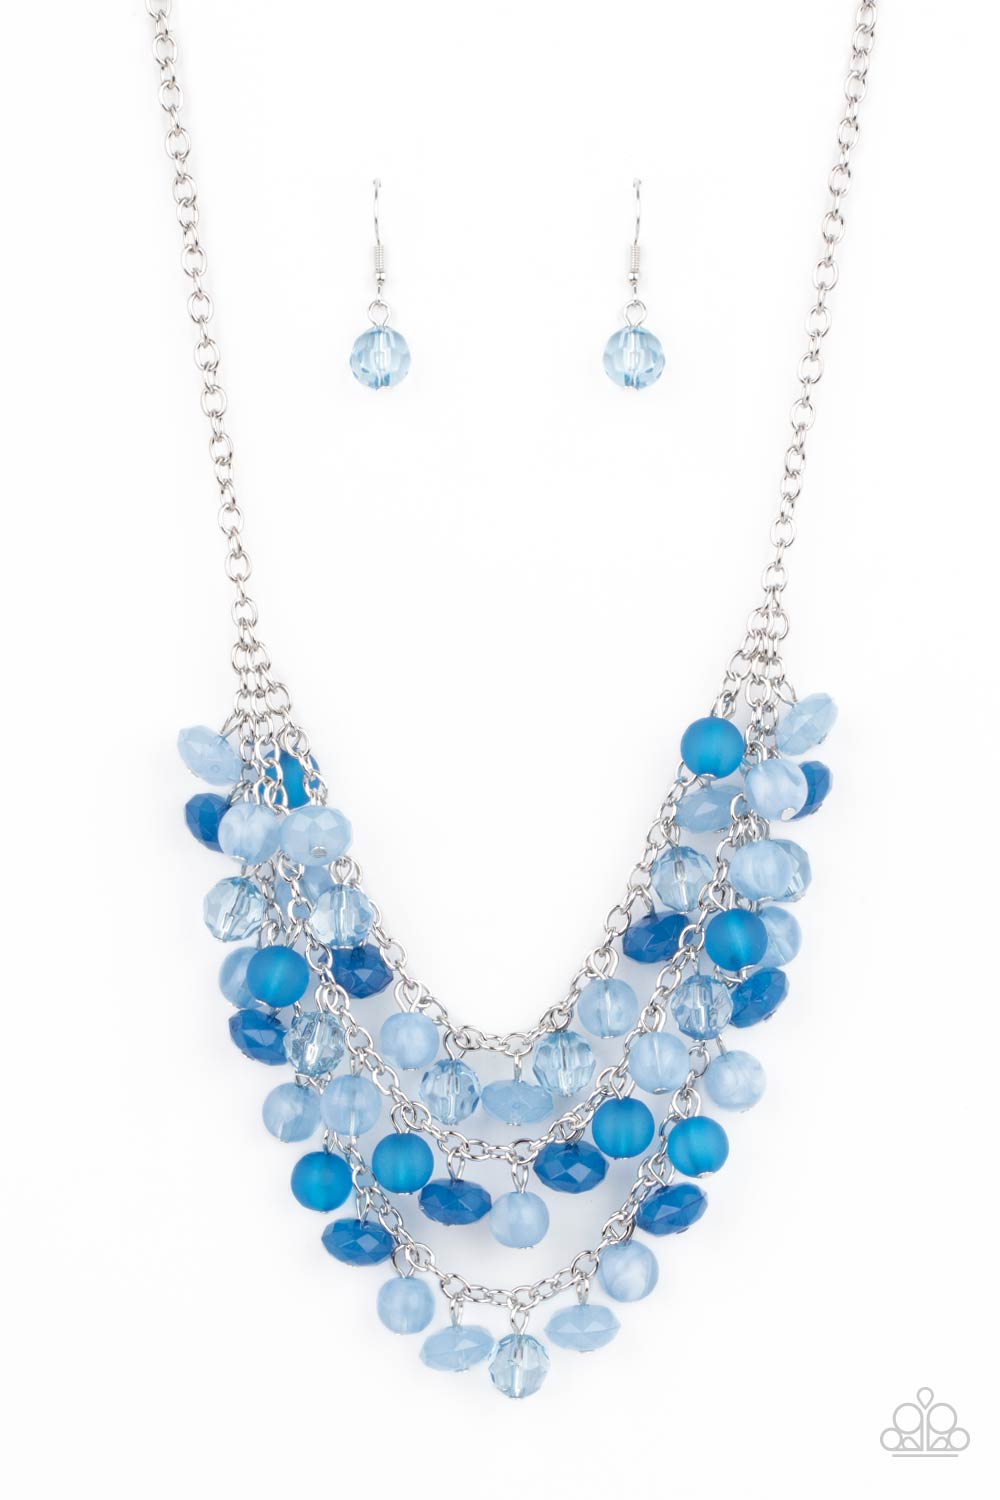 five-dollar-jewelry-fairytale-timelessness-blue-necklace-paparazzi-accessories